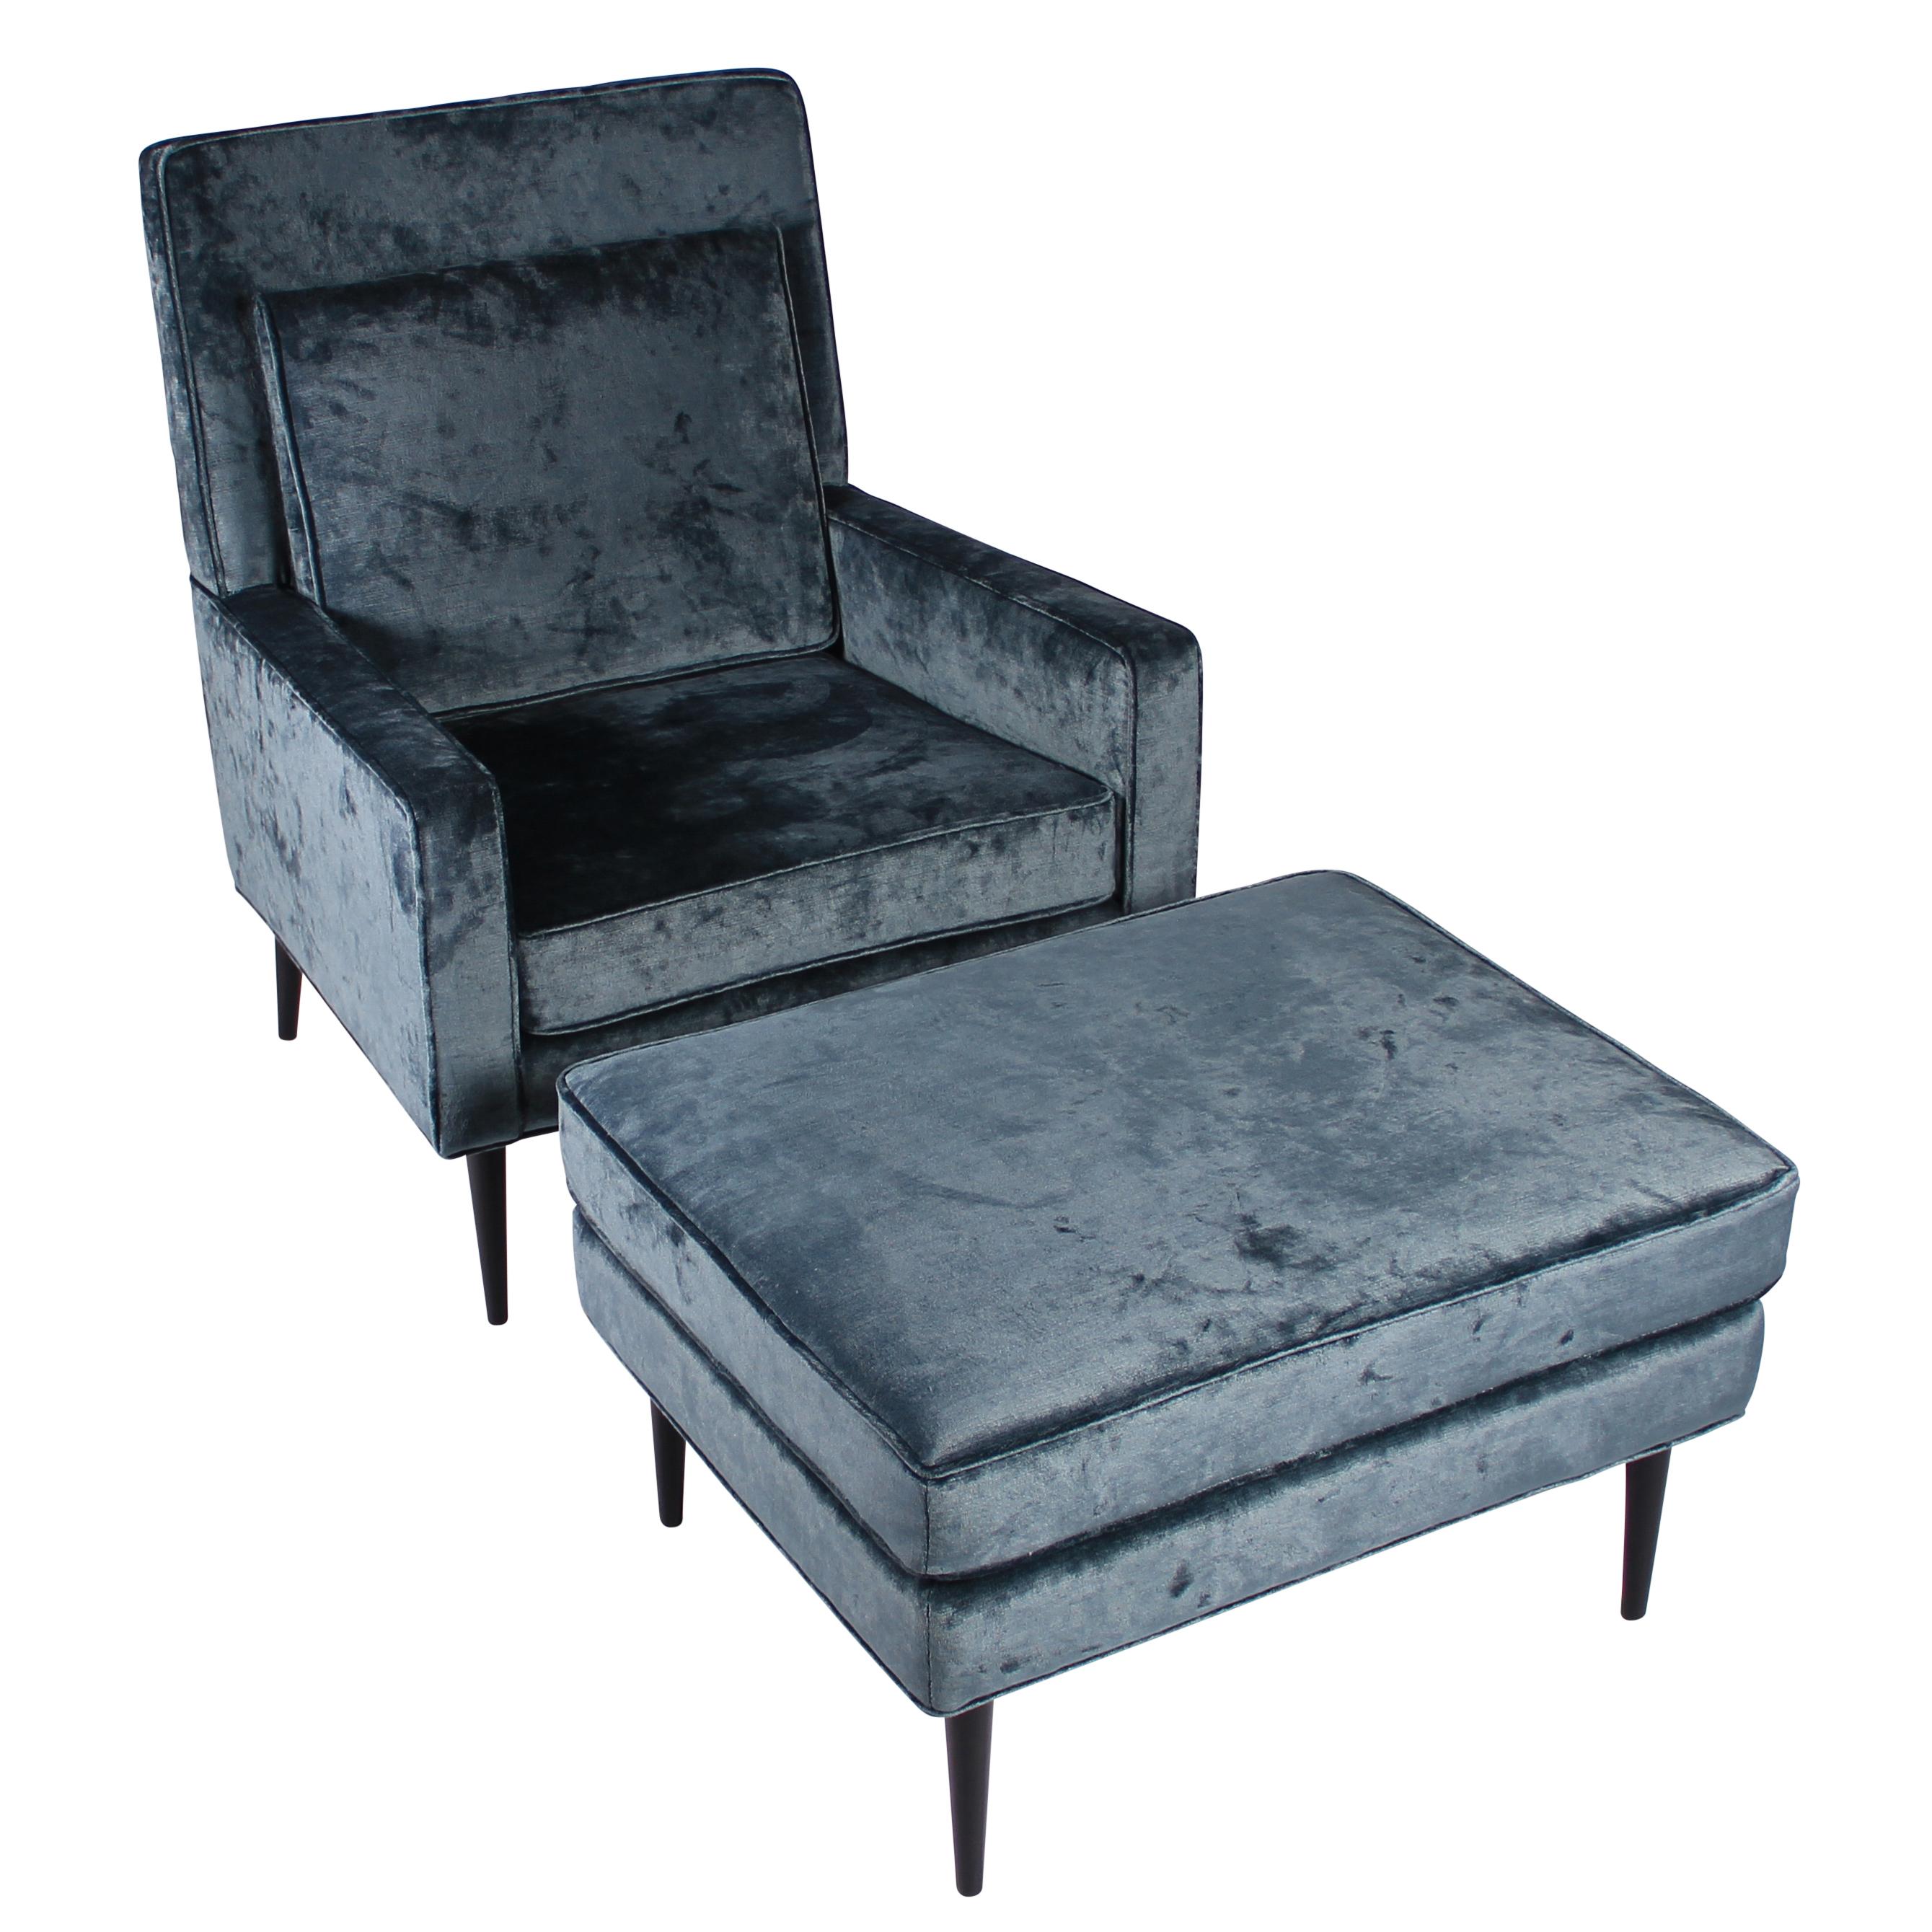 Beautifully scaled 1950s lounge chair and ottoman fully restored in a rich, steely-blue vintage-style velvet with new straps and foam, and newly ebonized tapered legs. Fabric swatch available. We are uncertain of the maker/designer, but this set is